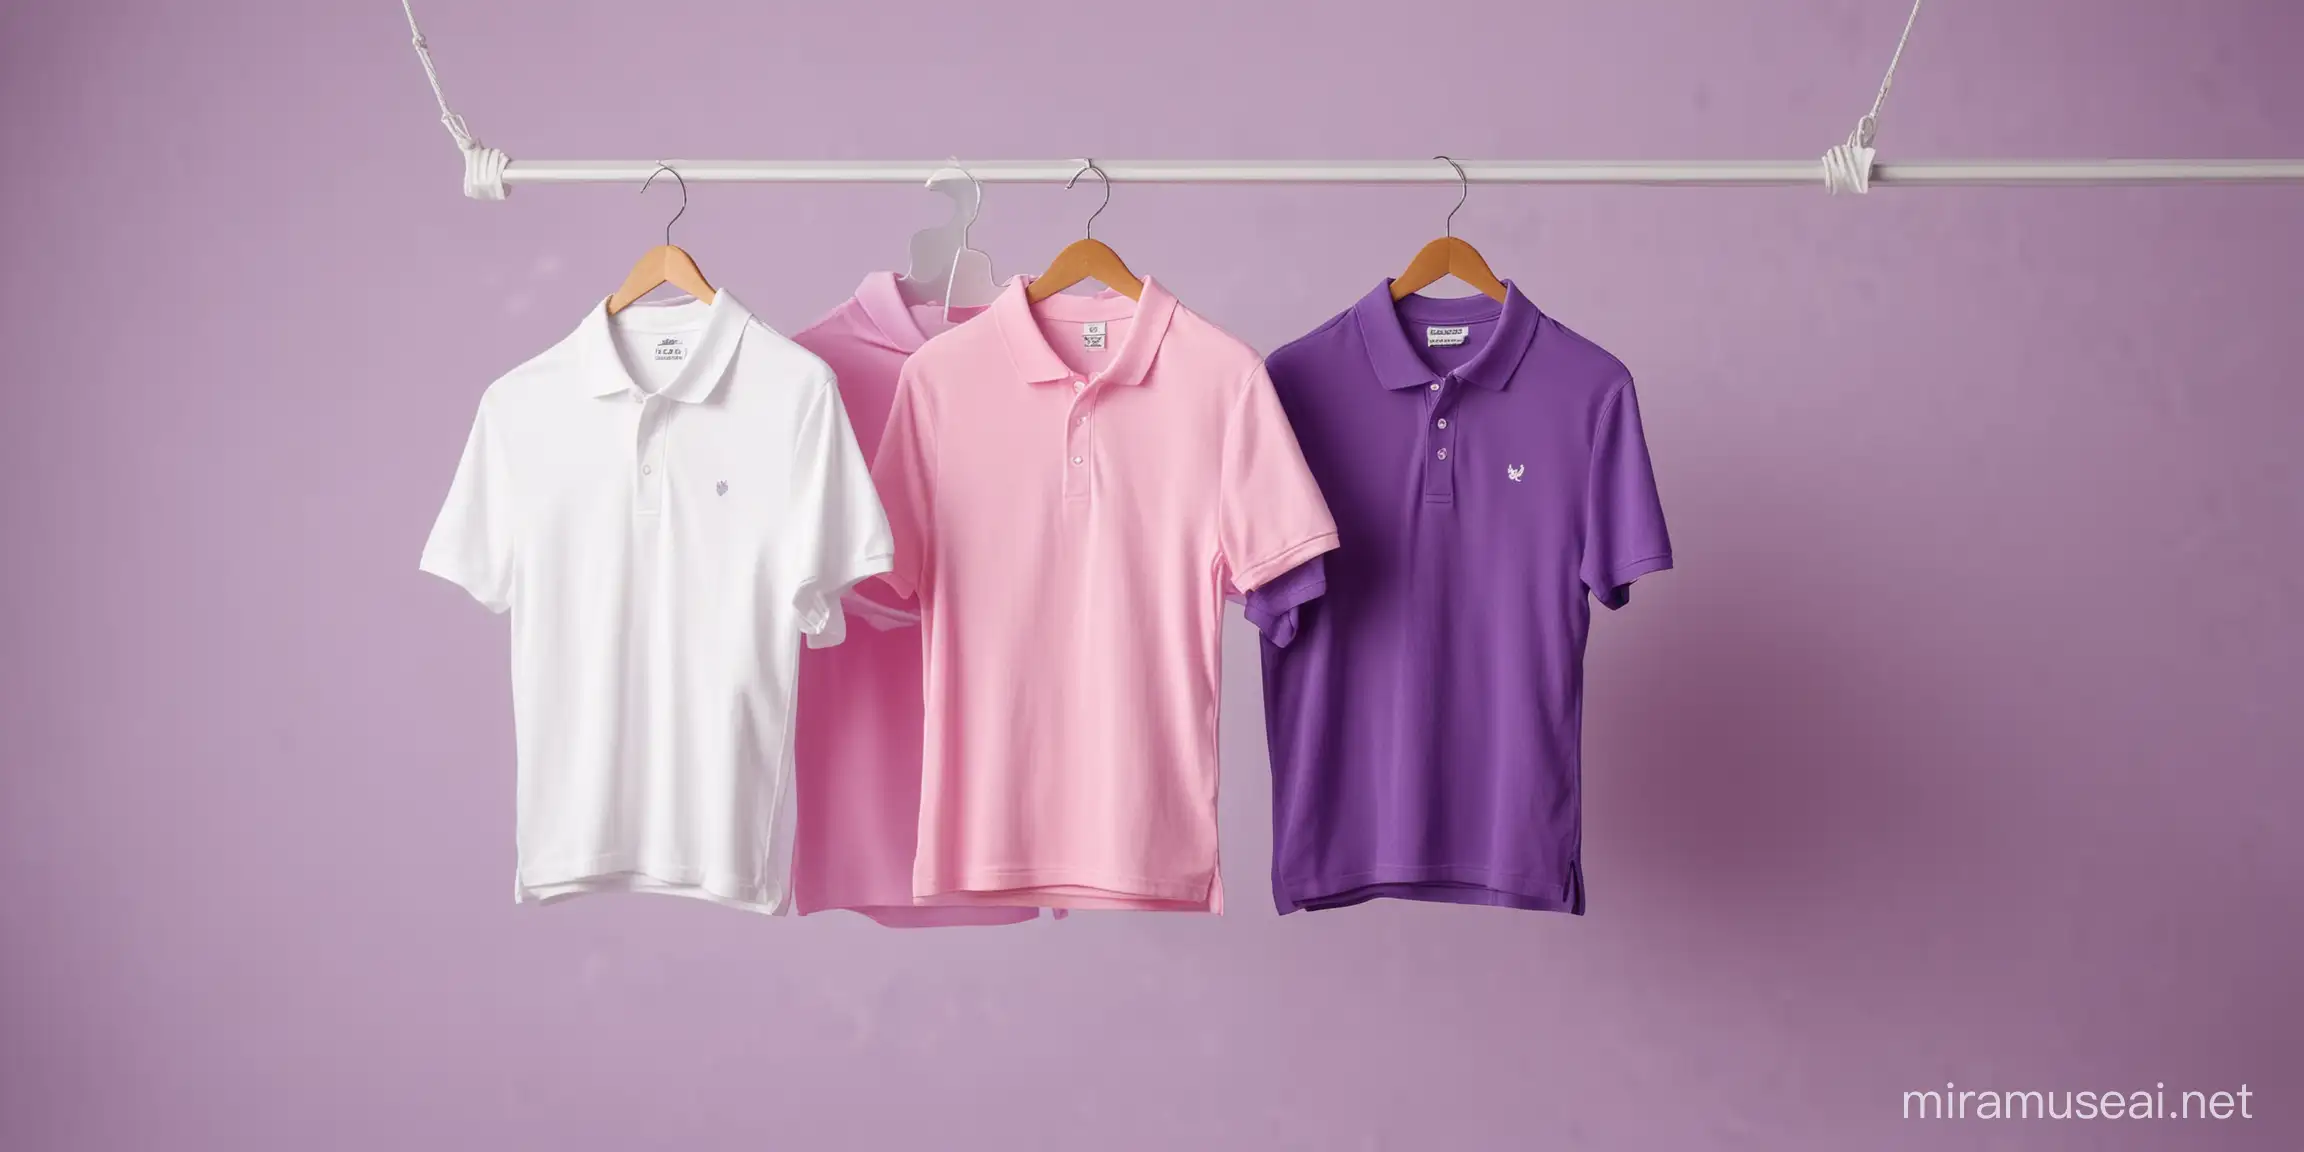 SummerThemed Polo TShirts Hanging on Hanger with Leafy Background